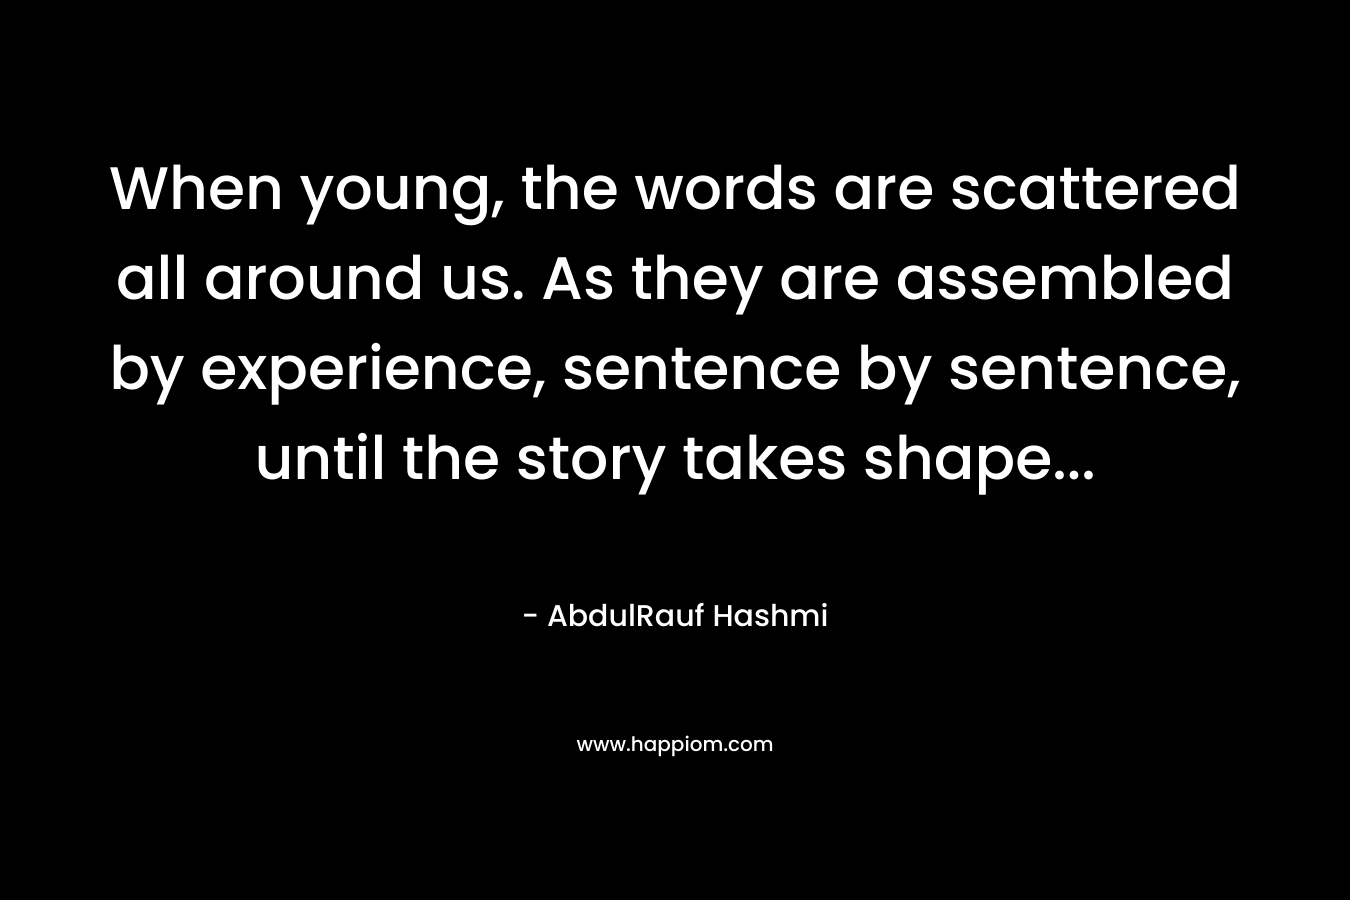 When young, the words are scattered all around us. As they are assembled by experience, sentence by sentence, until the story takes shape...